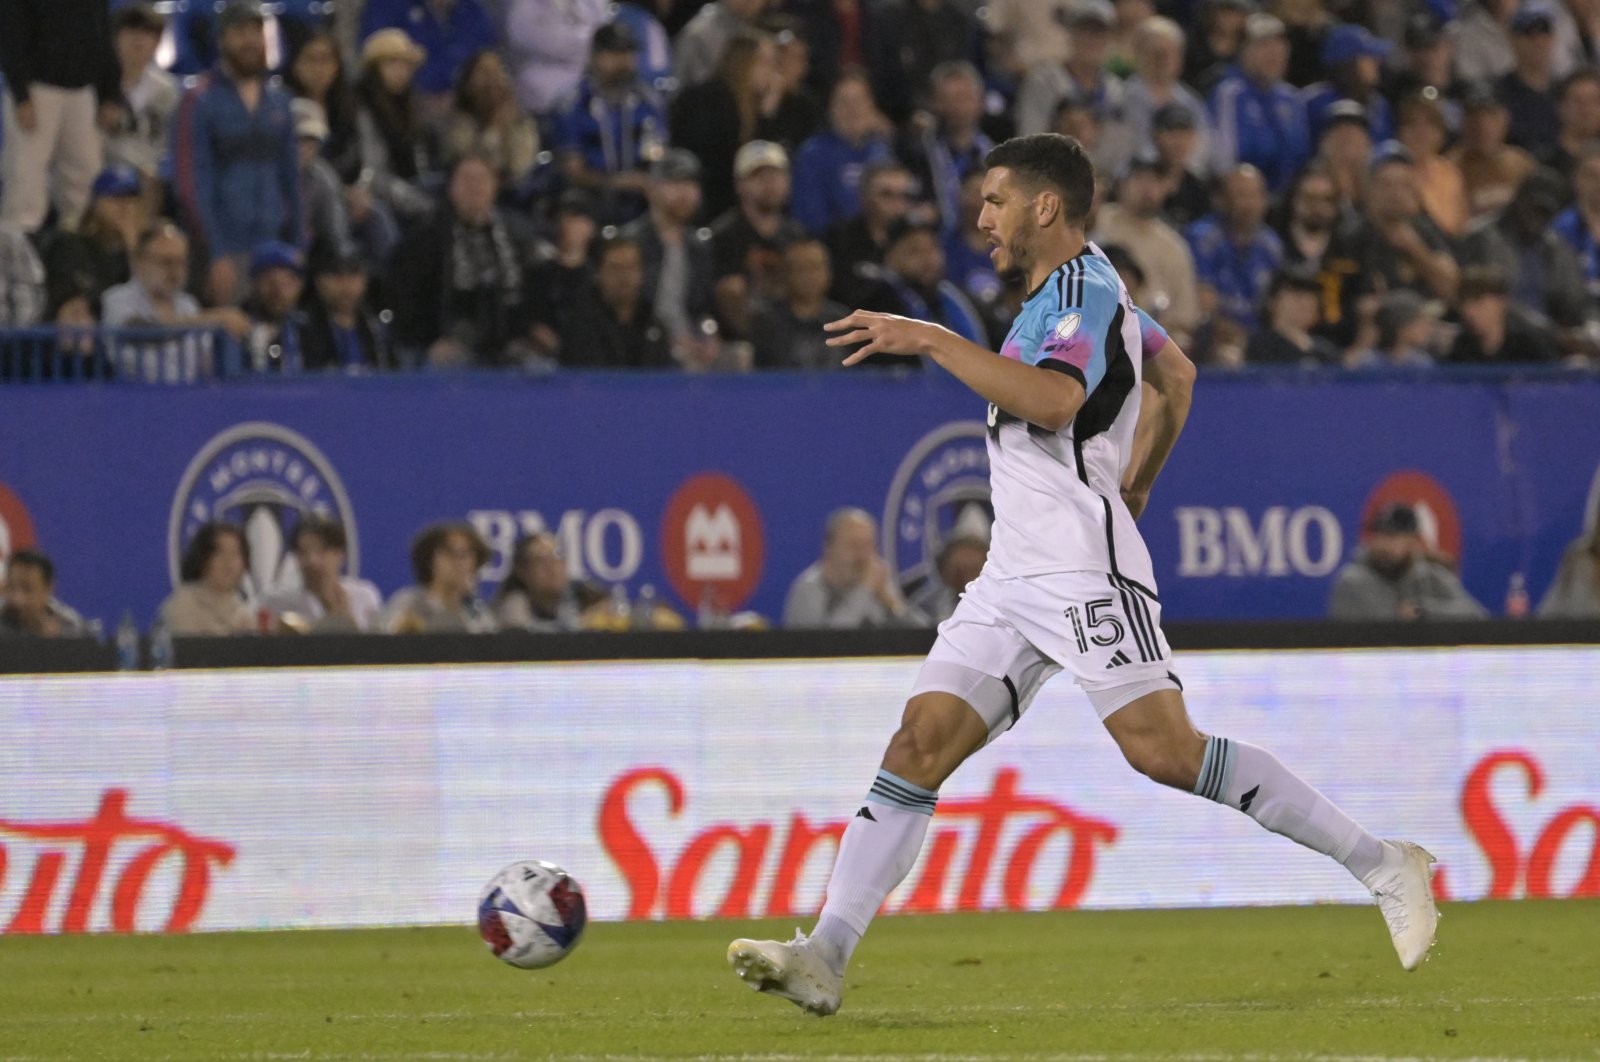 Minnesota United New Zealand defender Michael Boxall dribbles the ball in the second half against the CF Montreal at Stade Saputo, Montreal, Canada, June 10, 2023. (Reuters Photo)